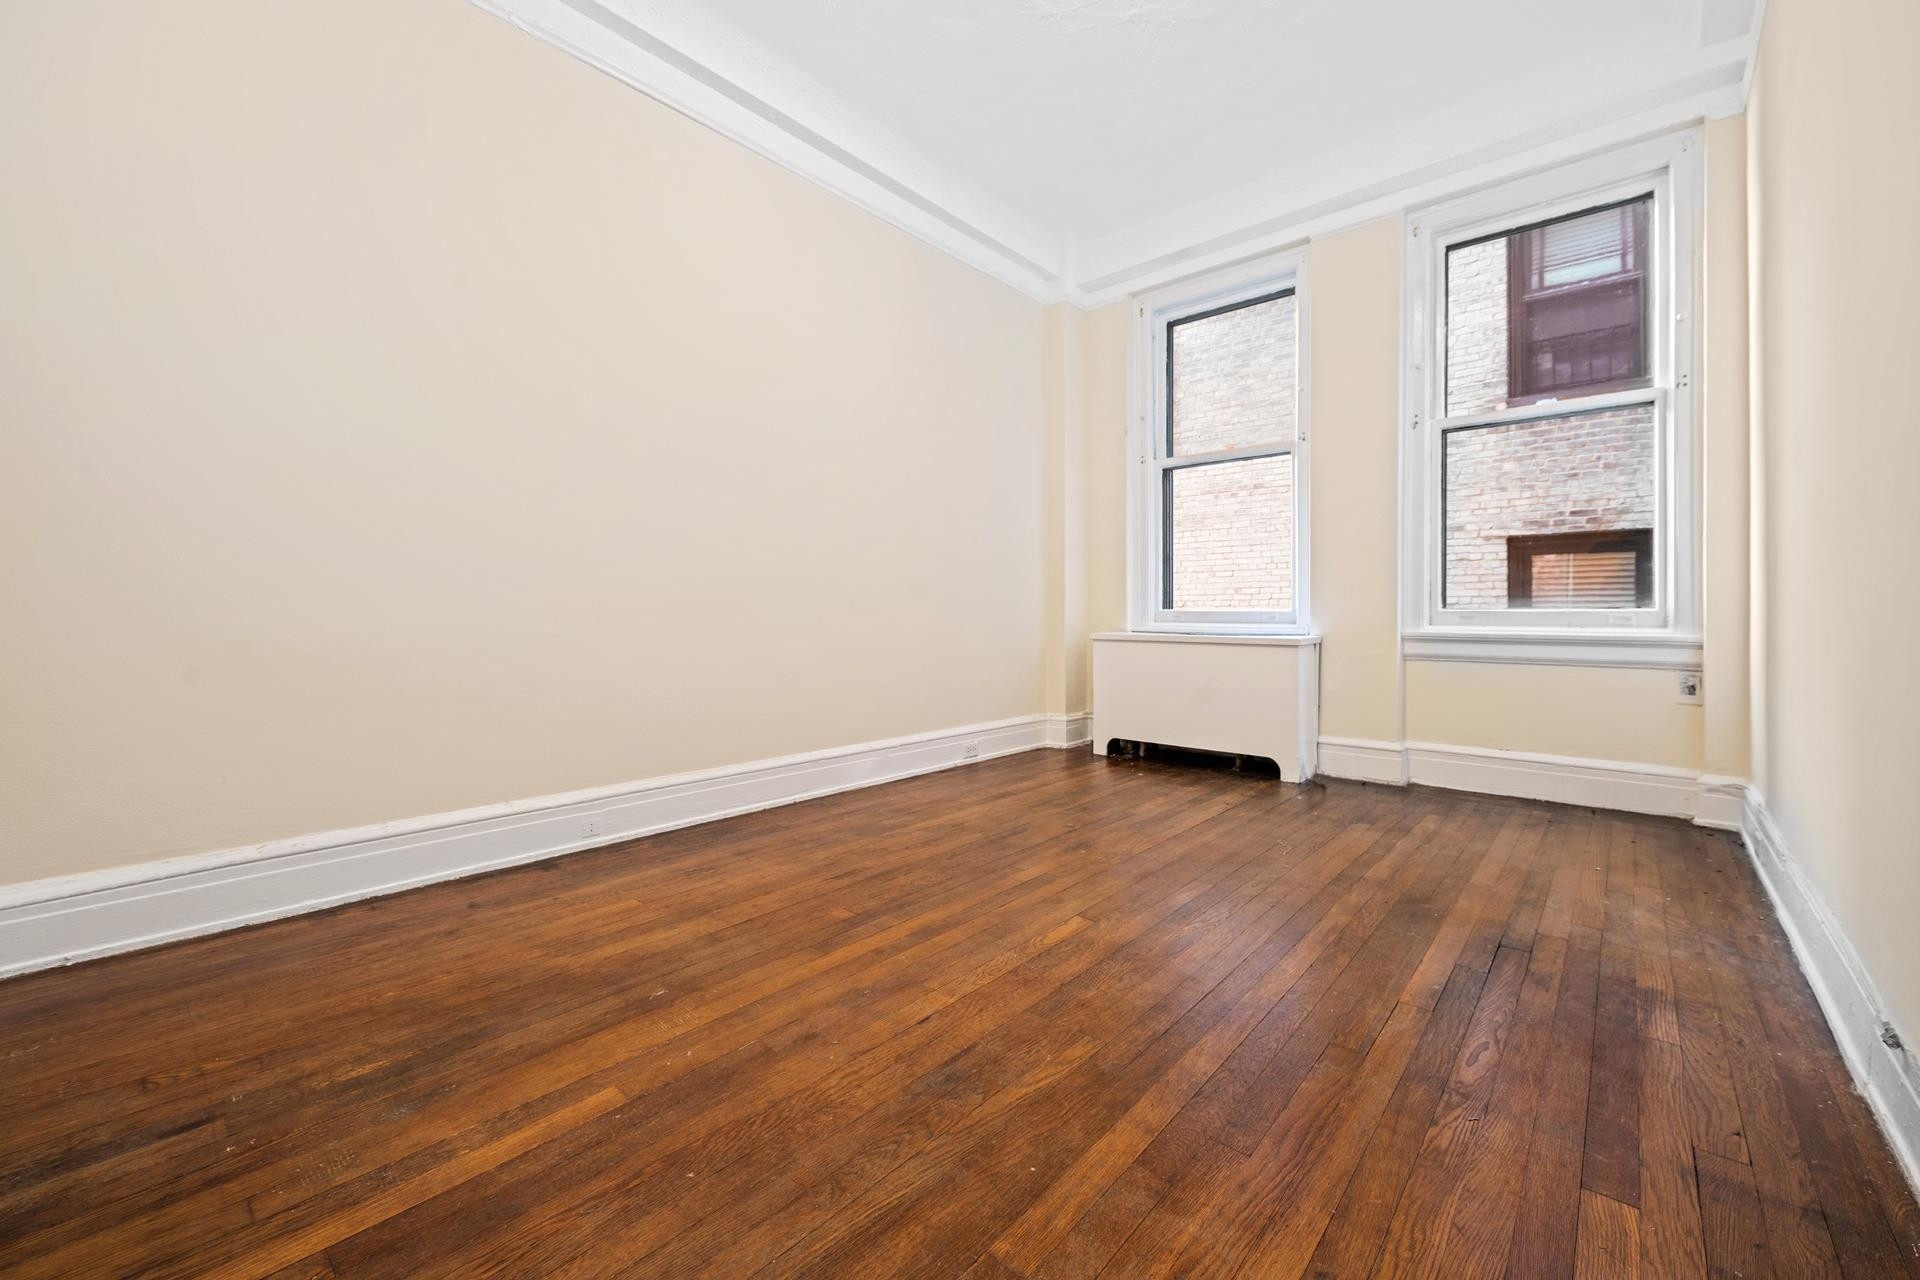 12. Co-op Properties for Sale at East 82 Corporation, 108 E 82ND ST, 7C Upper East Side, New York, NY 10028